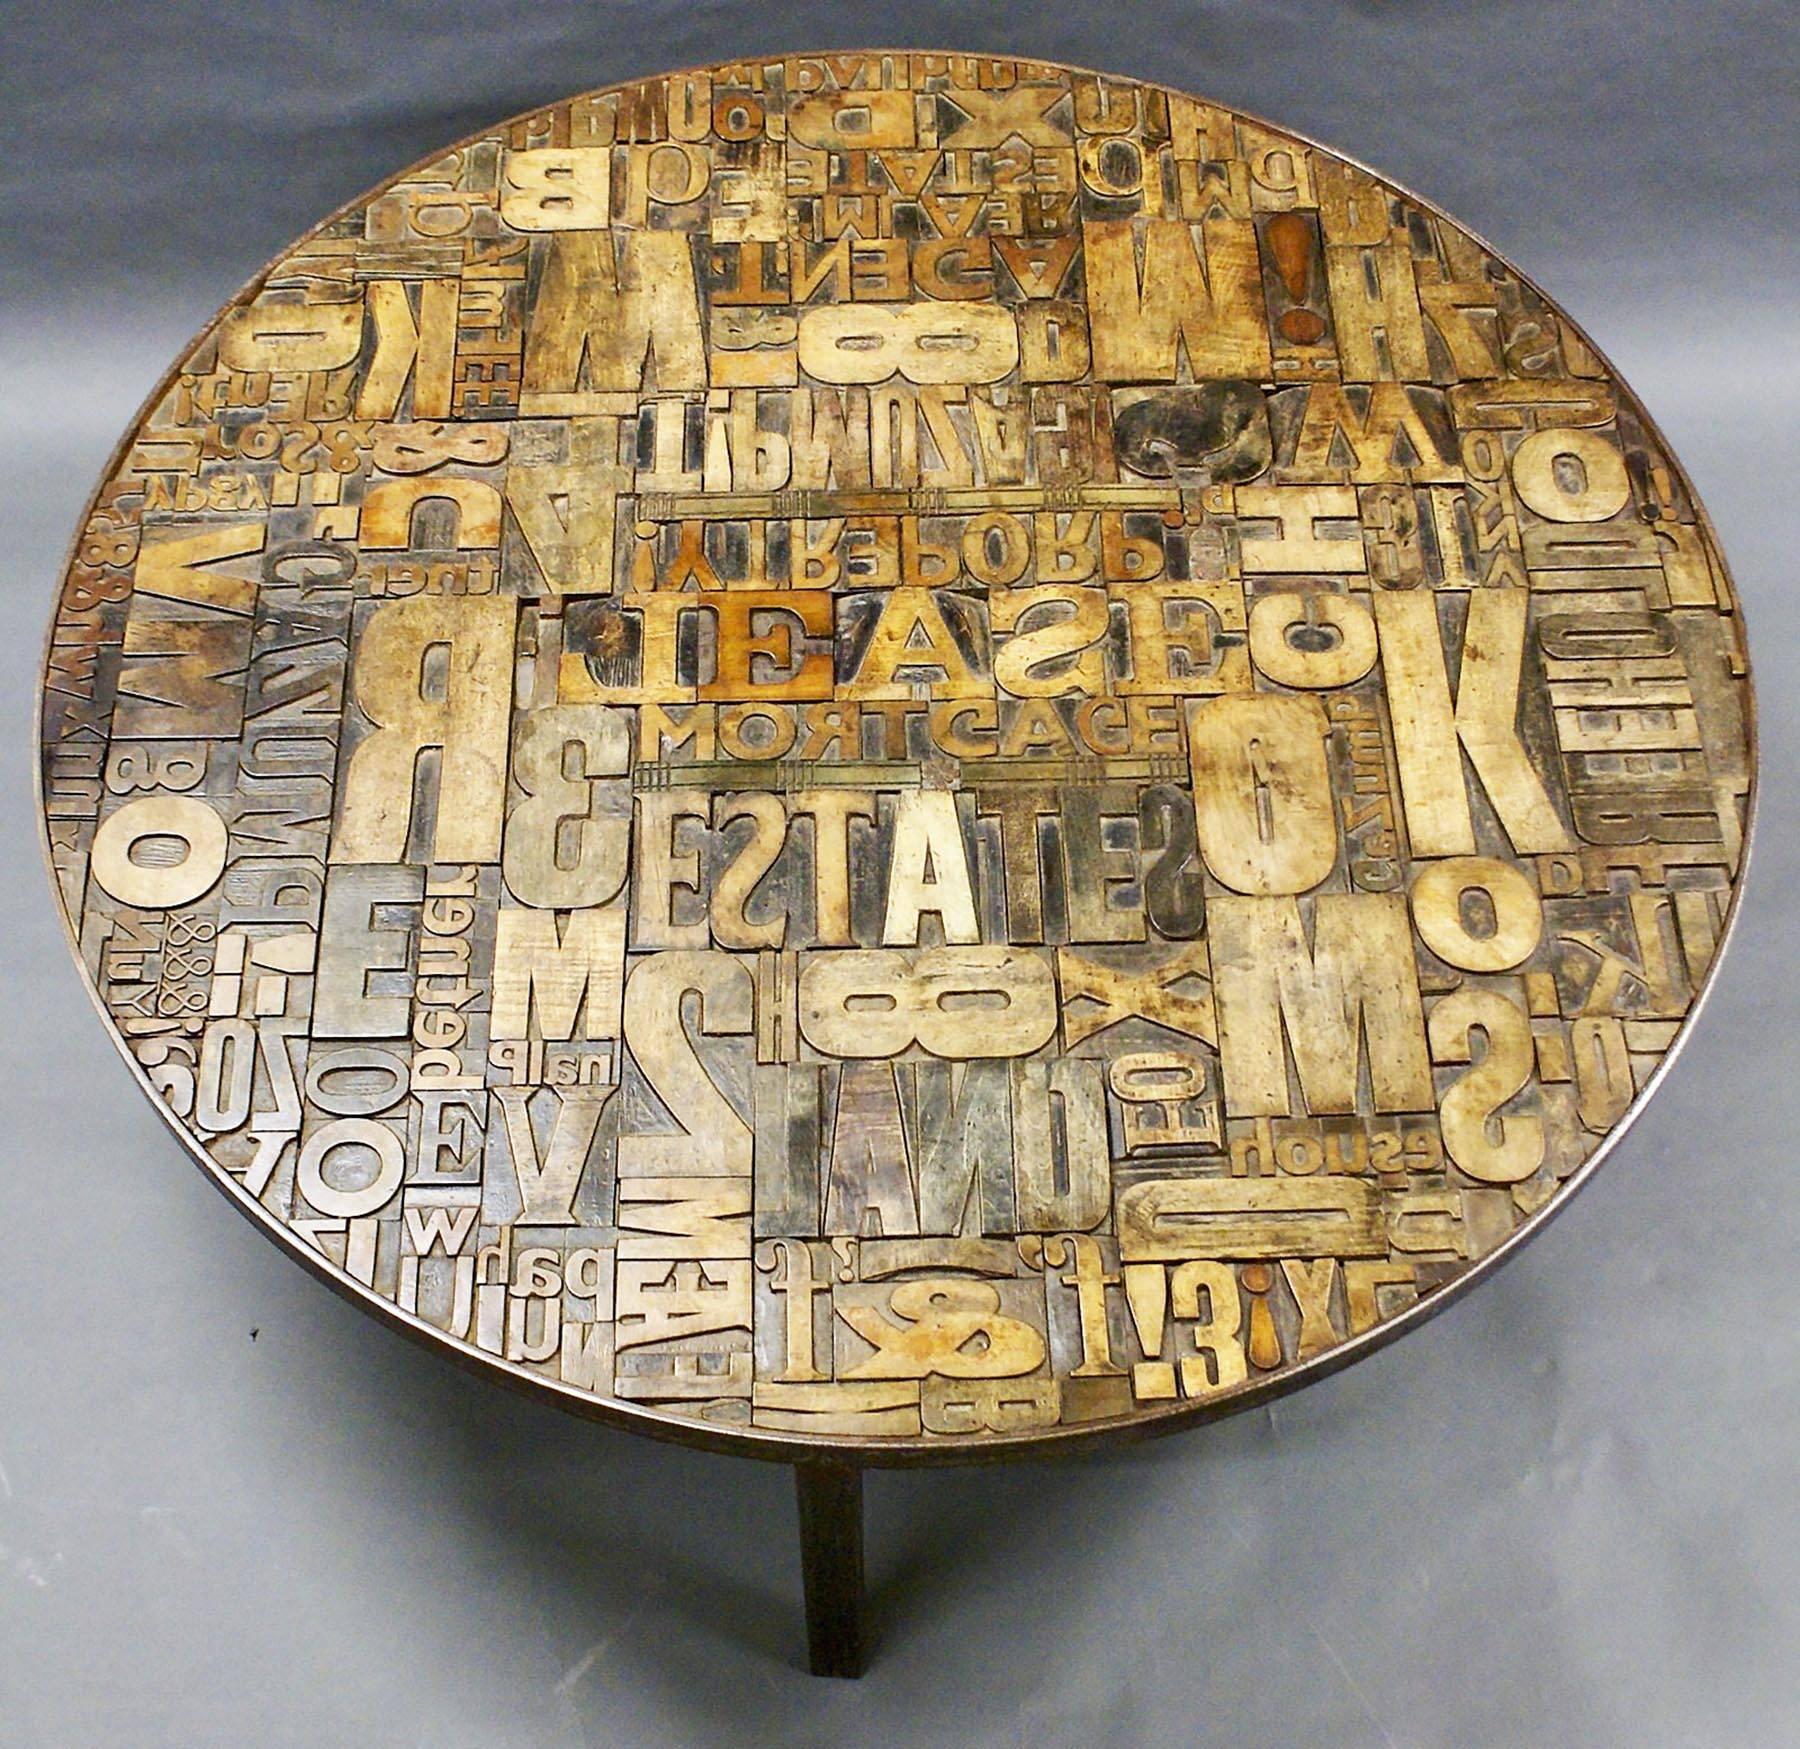 This unusual and highly decorative early 20th century coffee table is comprised of a random range of 19th century wooden printer’s blocks spelling out a range of words relating to property and sales. Leased, land and gazump are some of many terms